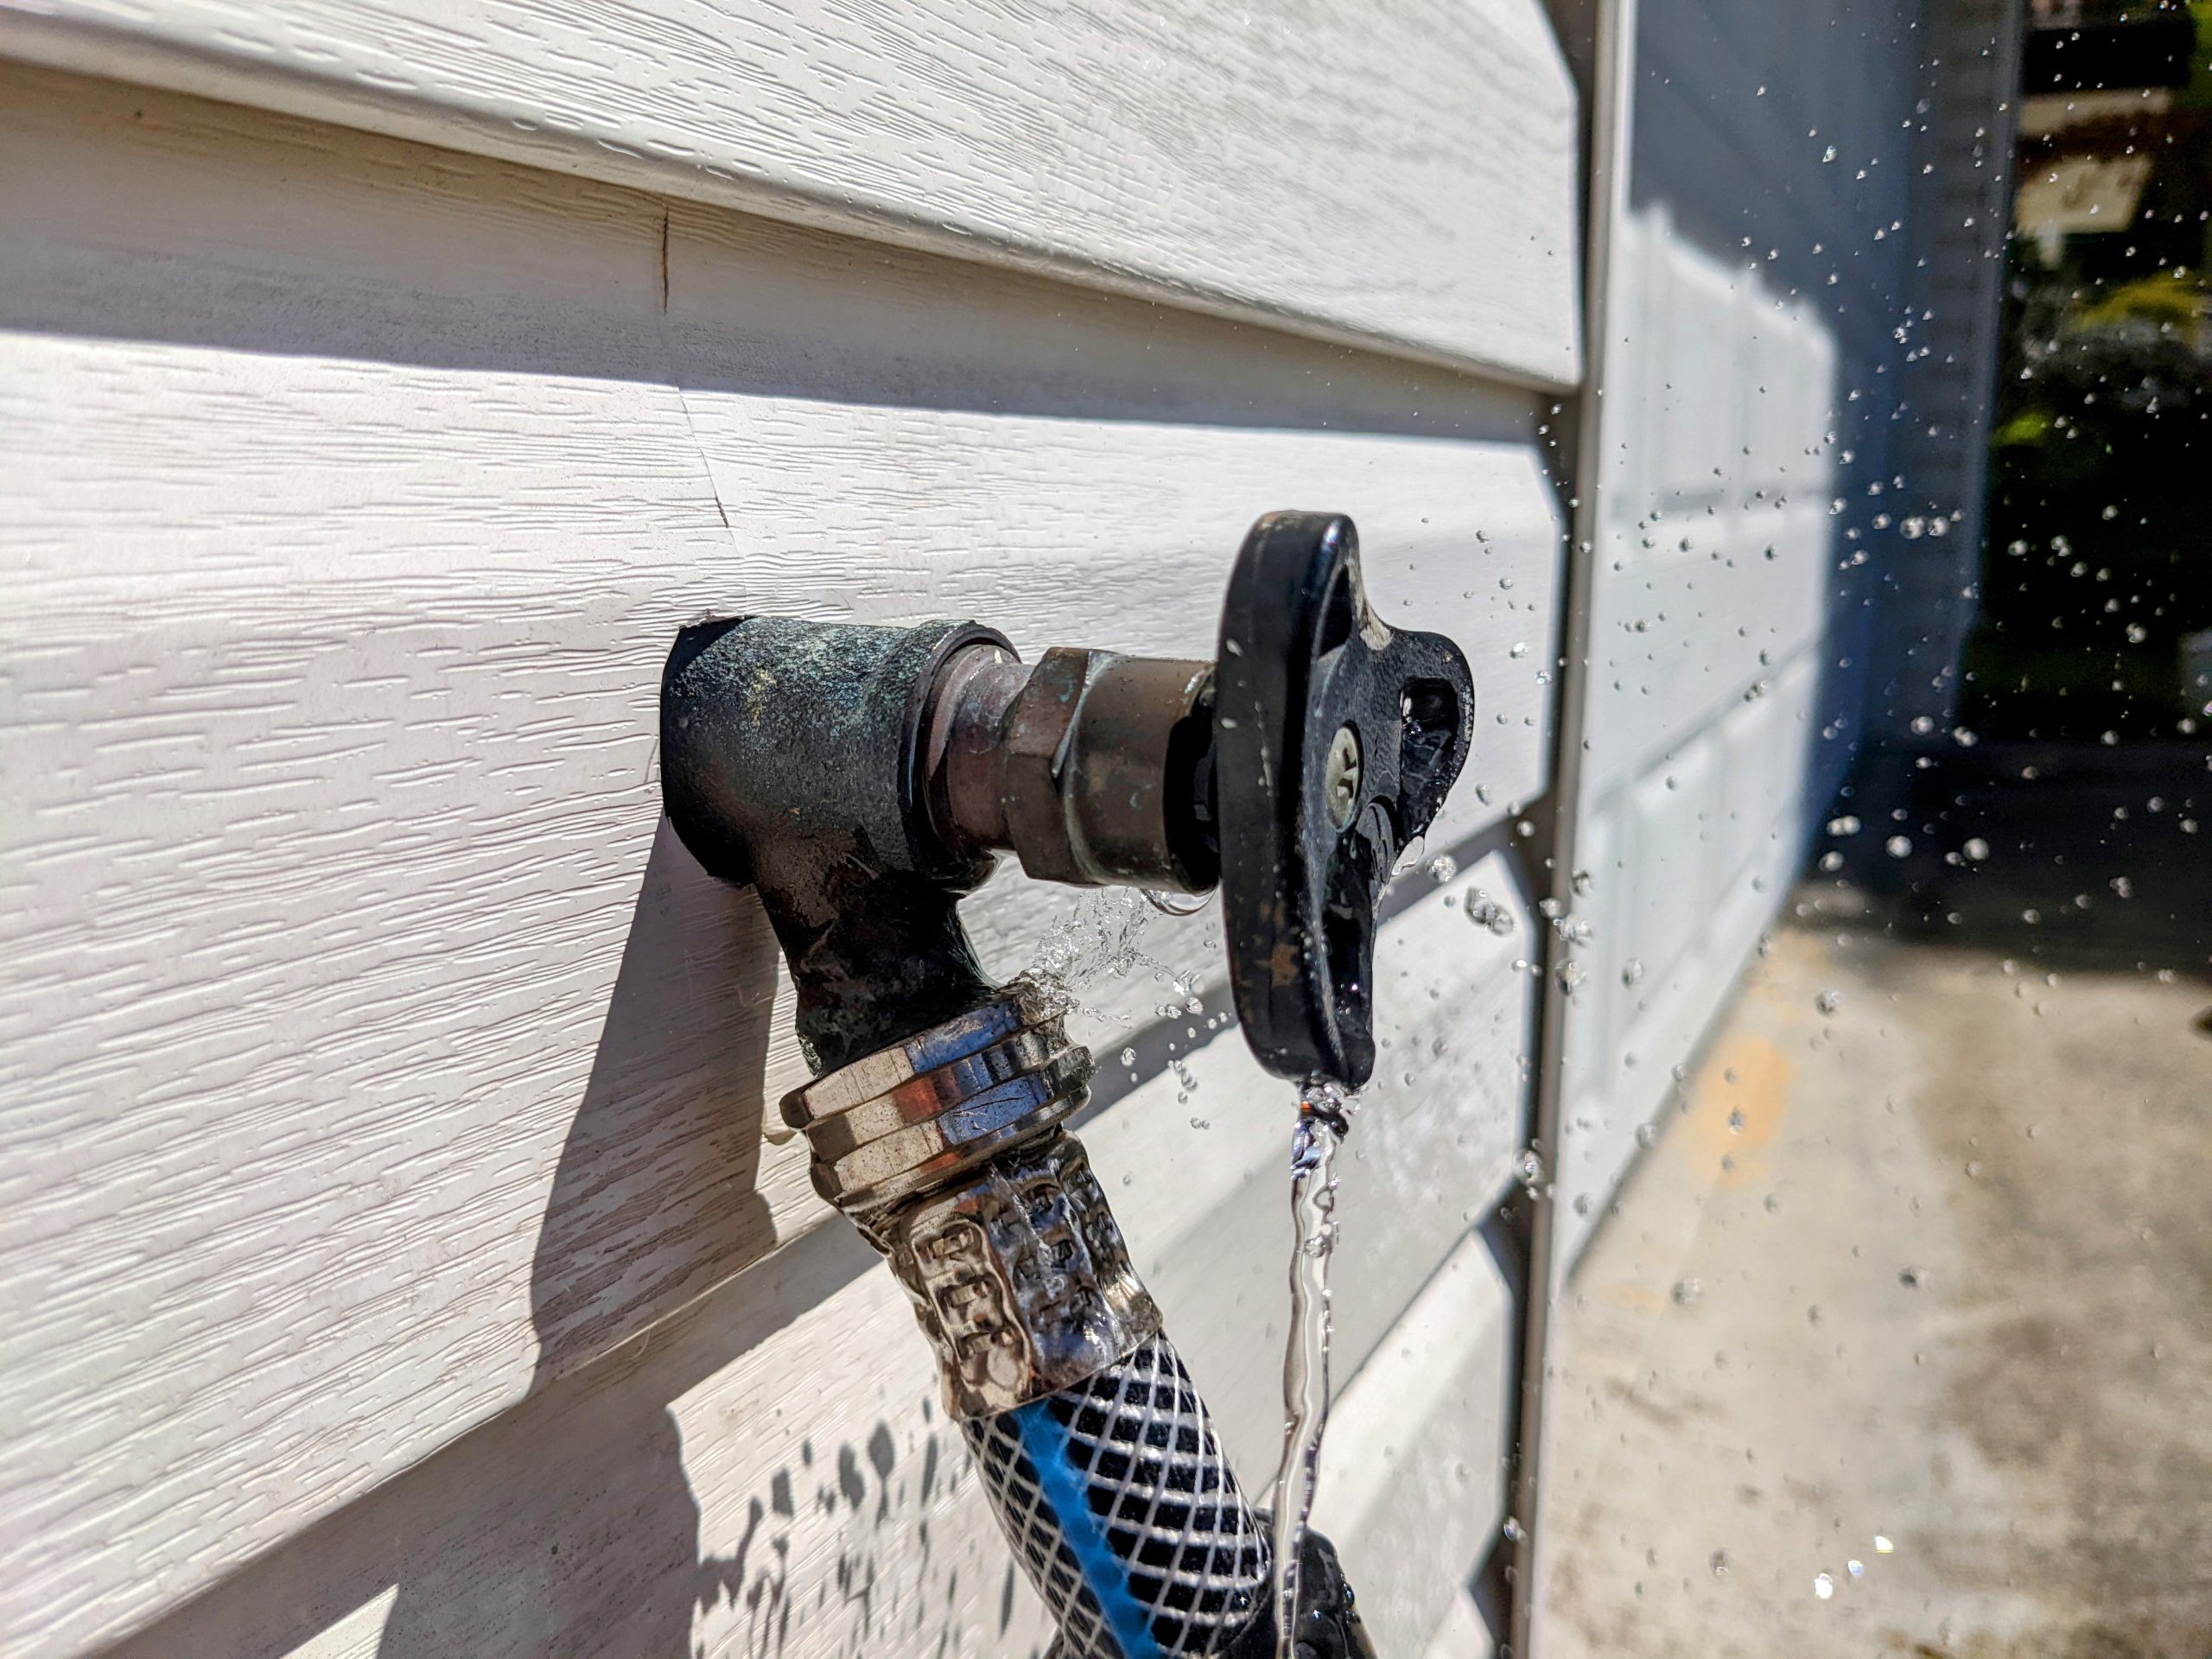 An outdoor tap leaking